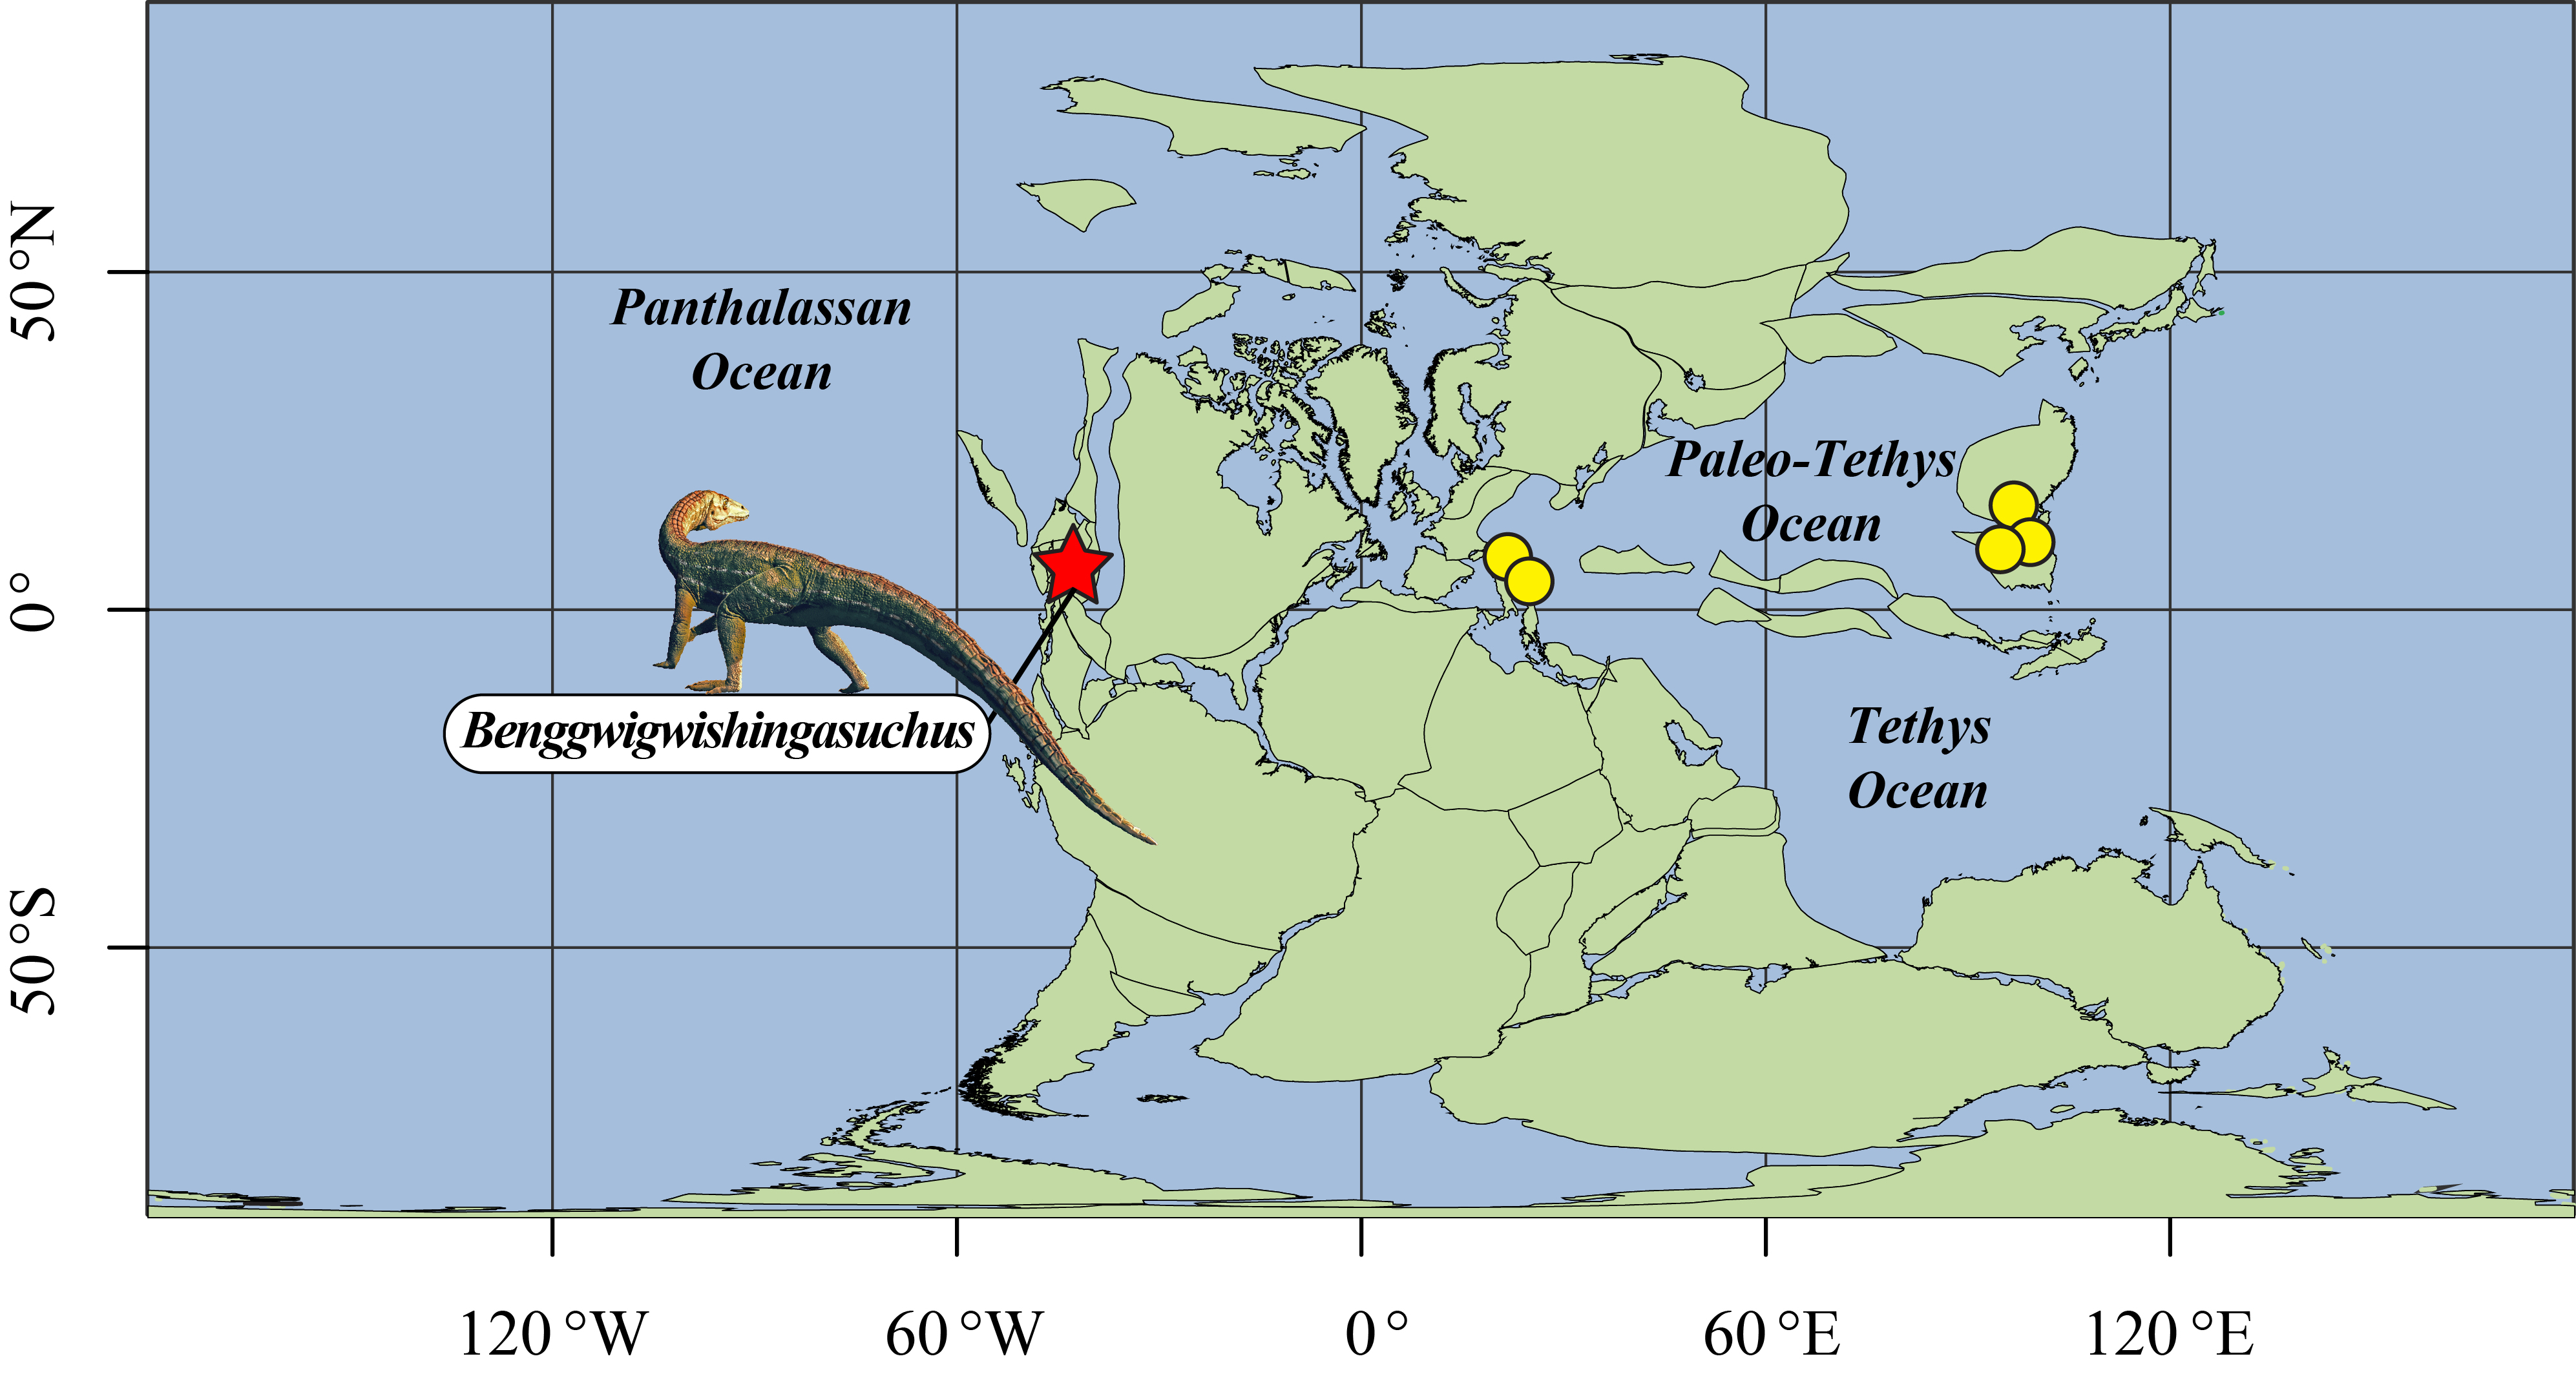 A map of the Middle Triassic oceans and the archosauriforms described from eastern coastal settings (yellow dots), as well as the new species B. eremicarminis from the Panthalassan coast (red star). CREDIT: Nate Smith